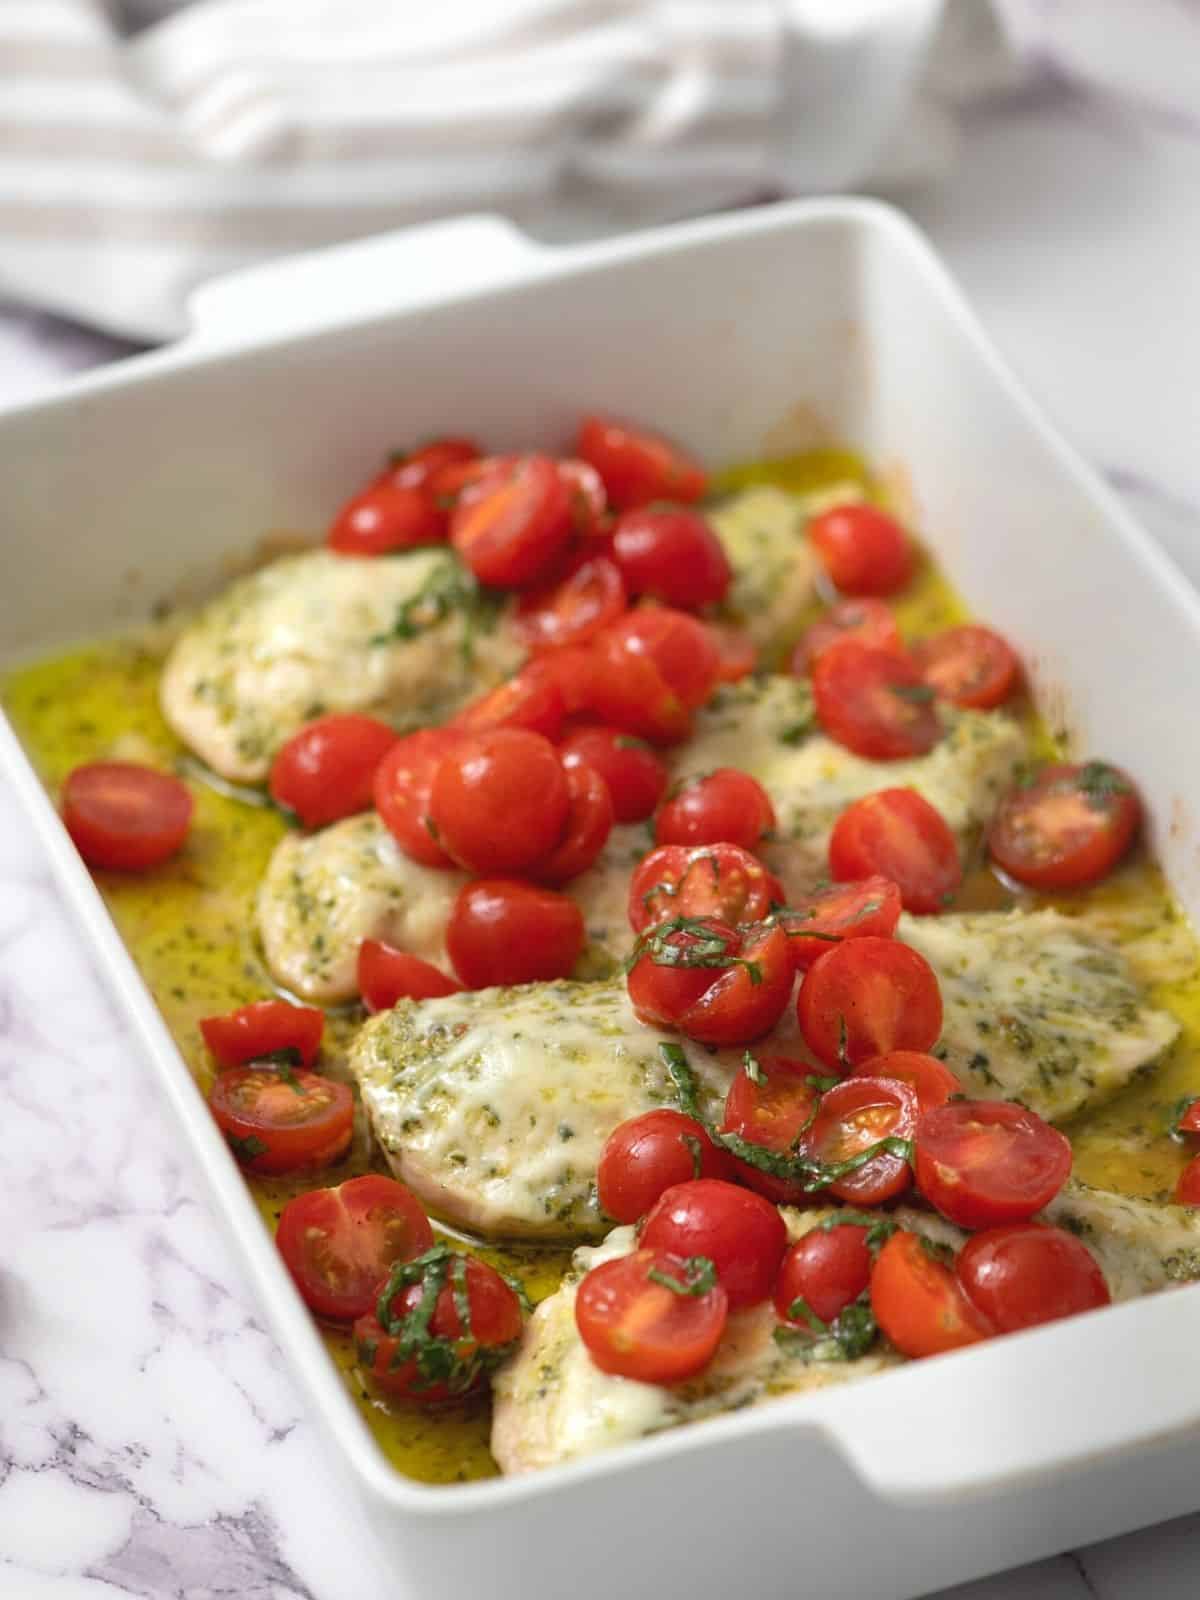 Baked Chicken topped with pesto, cheese, and fresh tomatoes.